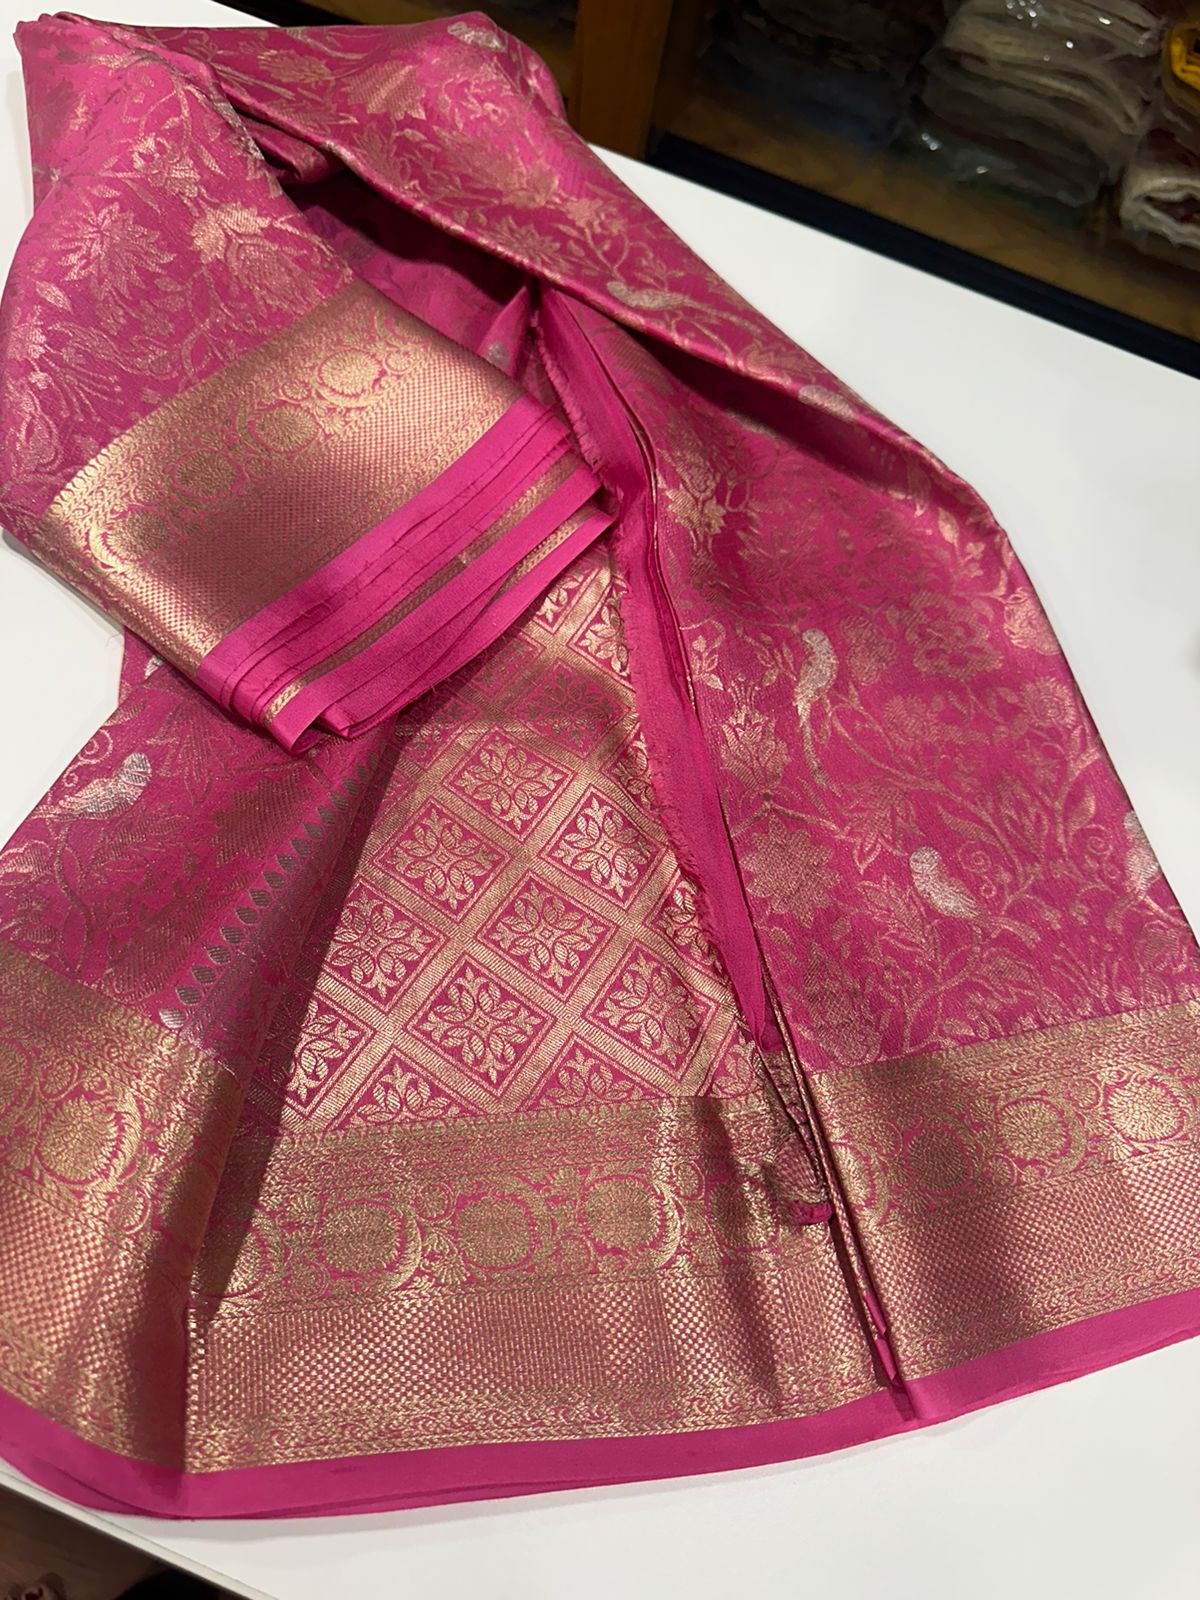 Pure brocade Mysore silk sarees with 120 grm thickness and beautiful Silk brocade fabric with silver zari weaving allover saree with rich pallu n plain blouse with borders